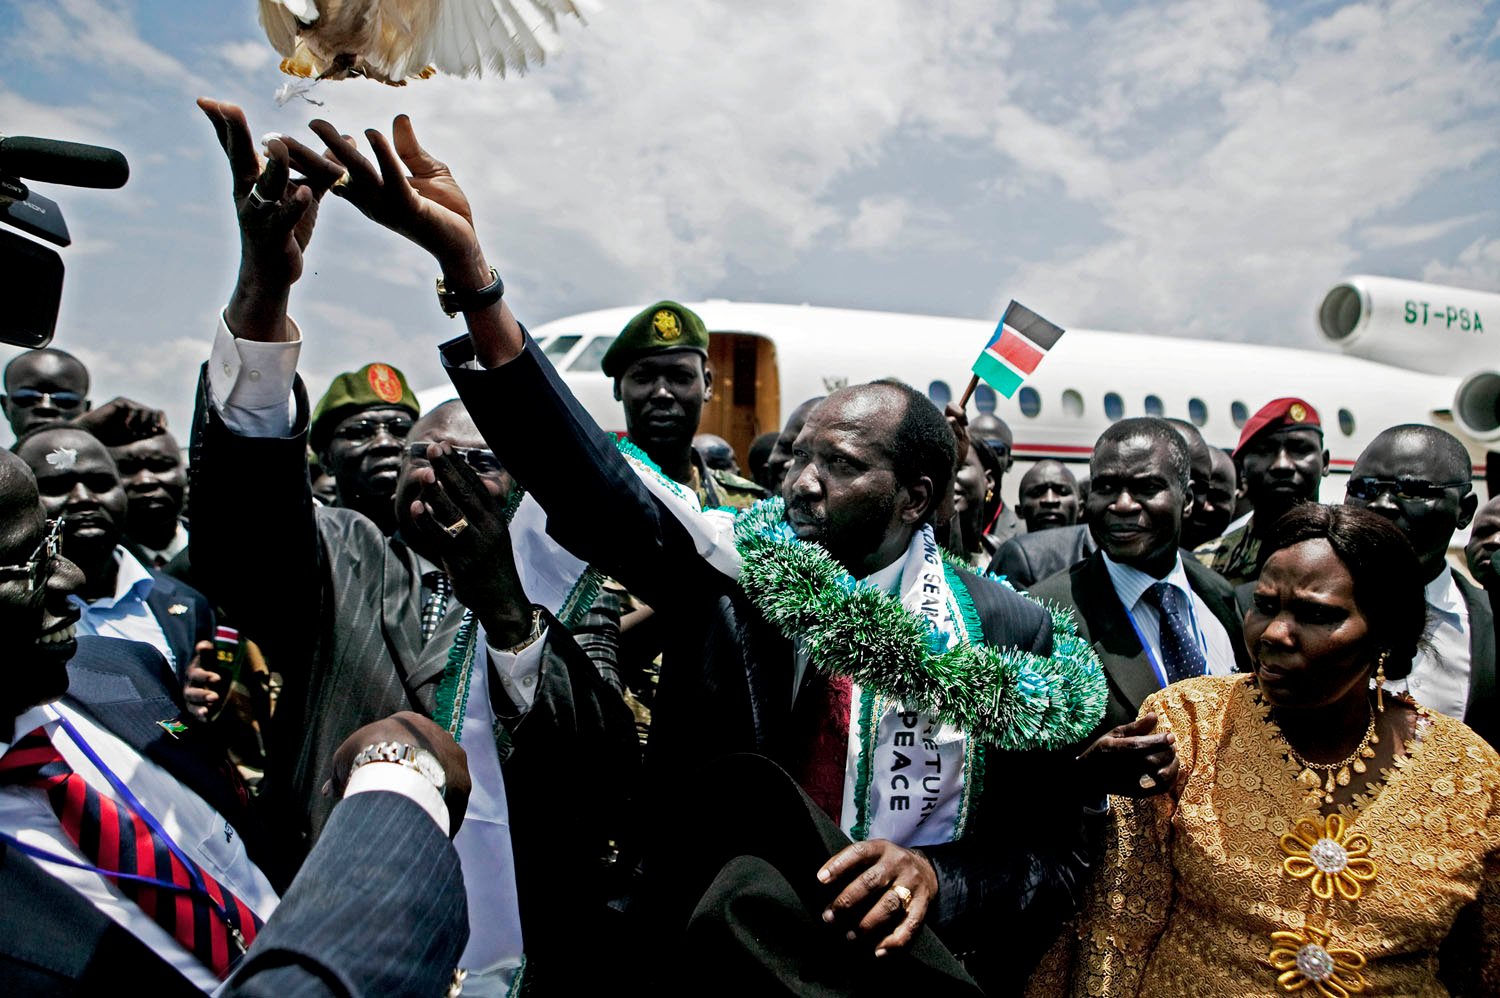  Salva Kiir (C-green sash), the President of the Government of South Sudan and Riek Machar (2nd L) release a dove upon Kiir's return from the United States. The two men were bitter enemies during the latter years of the civil war in southern Sudan. M